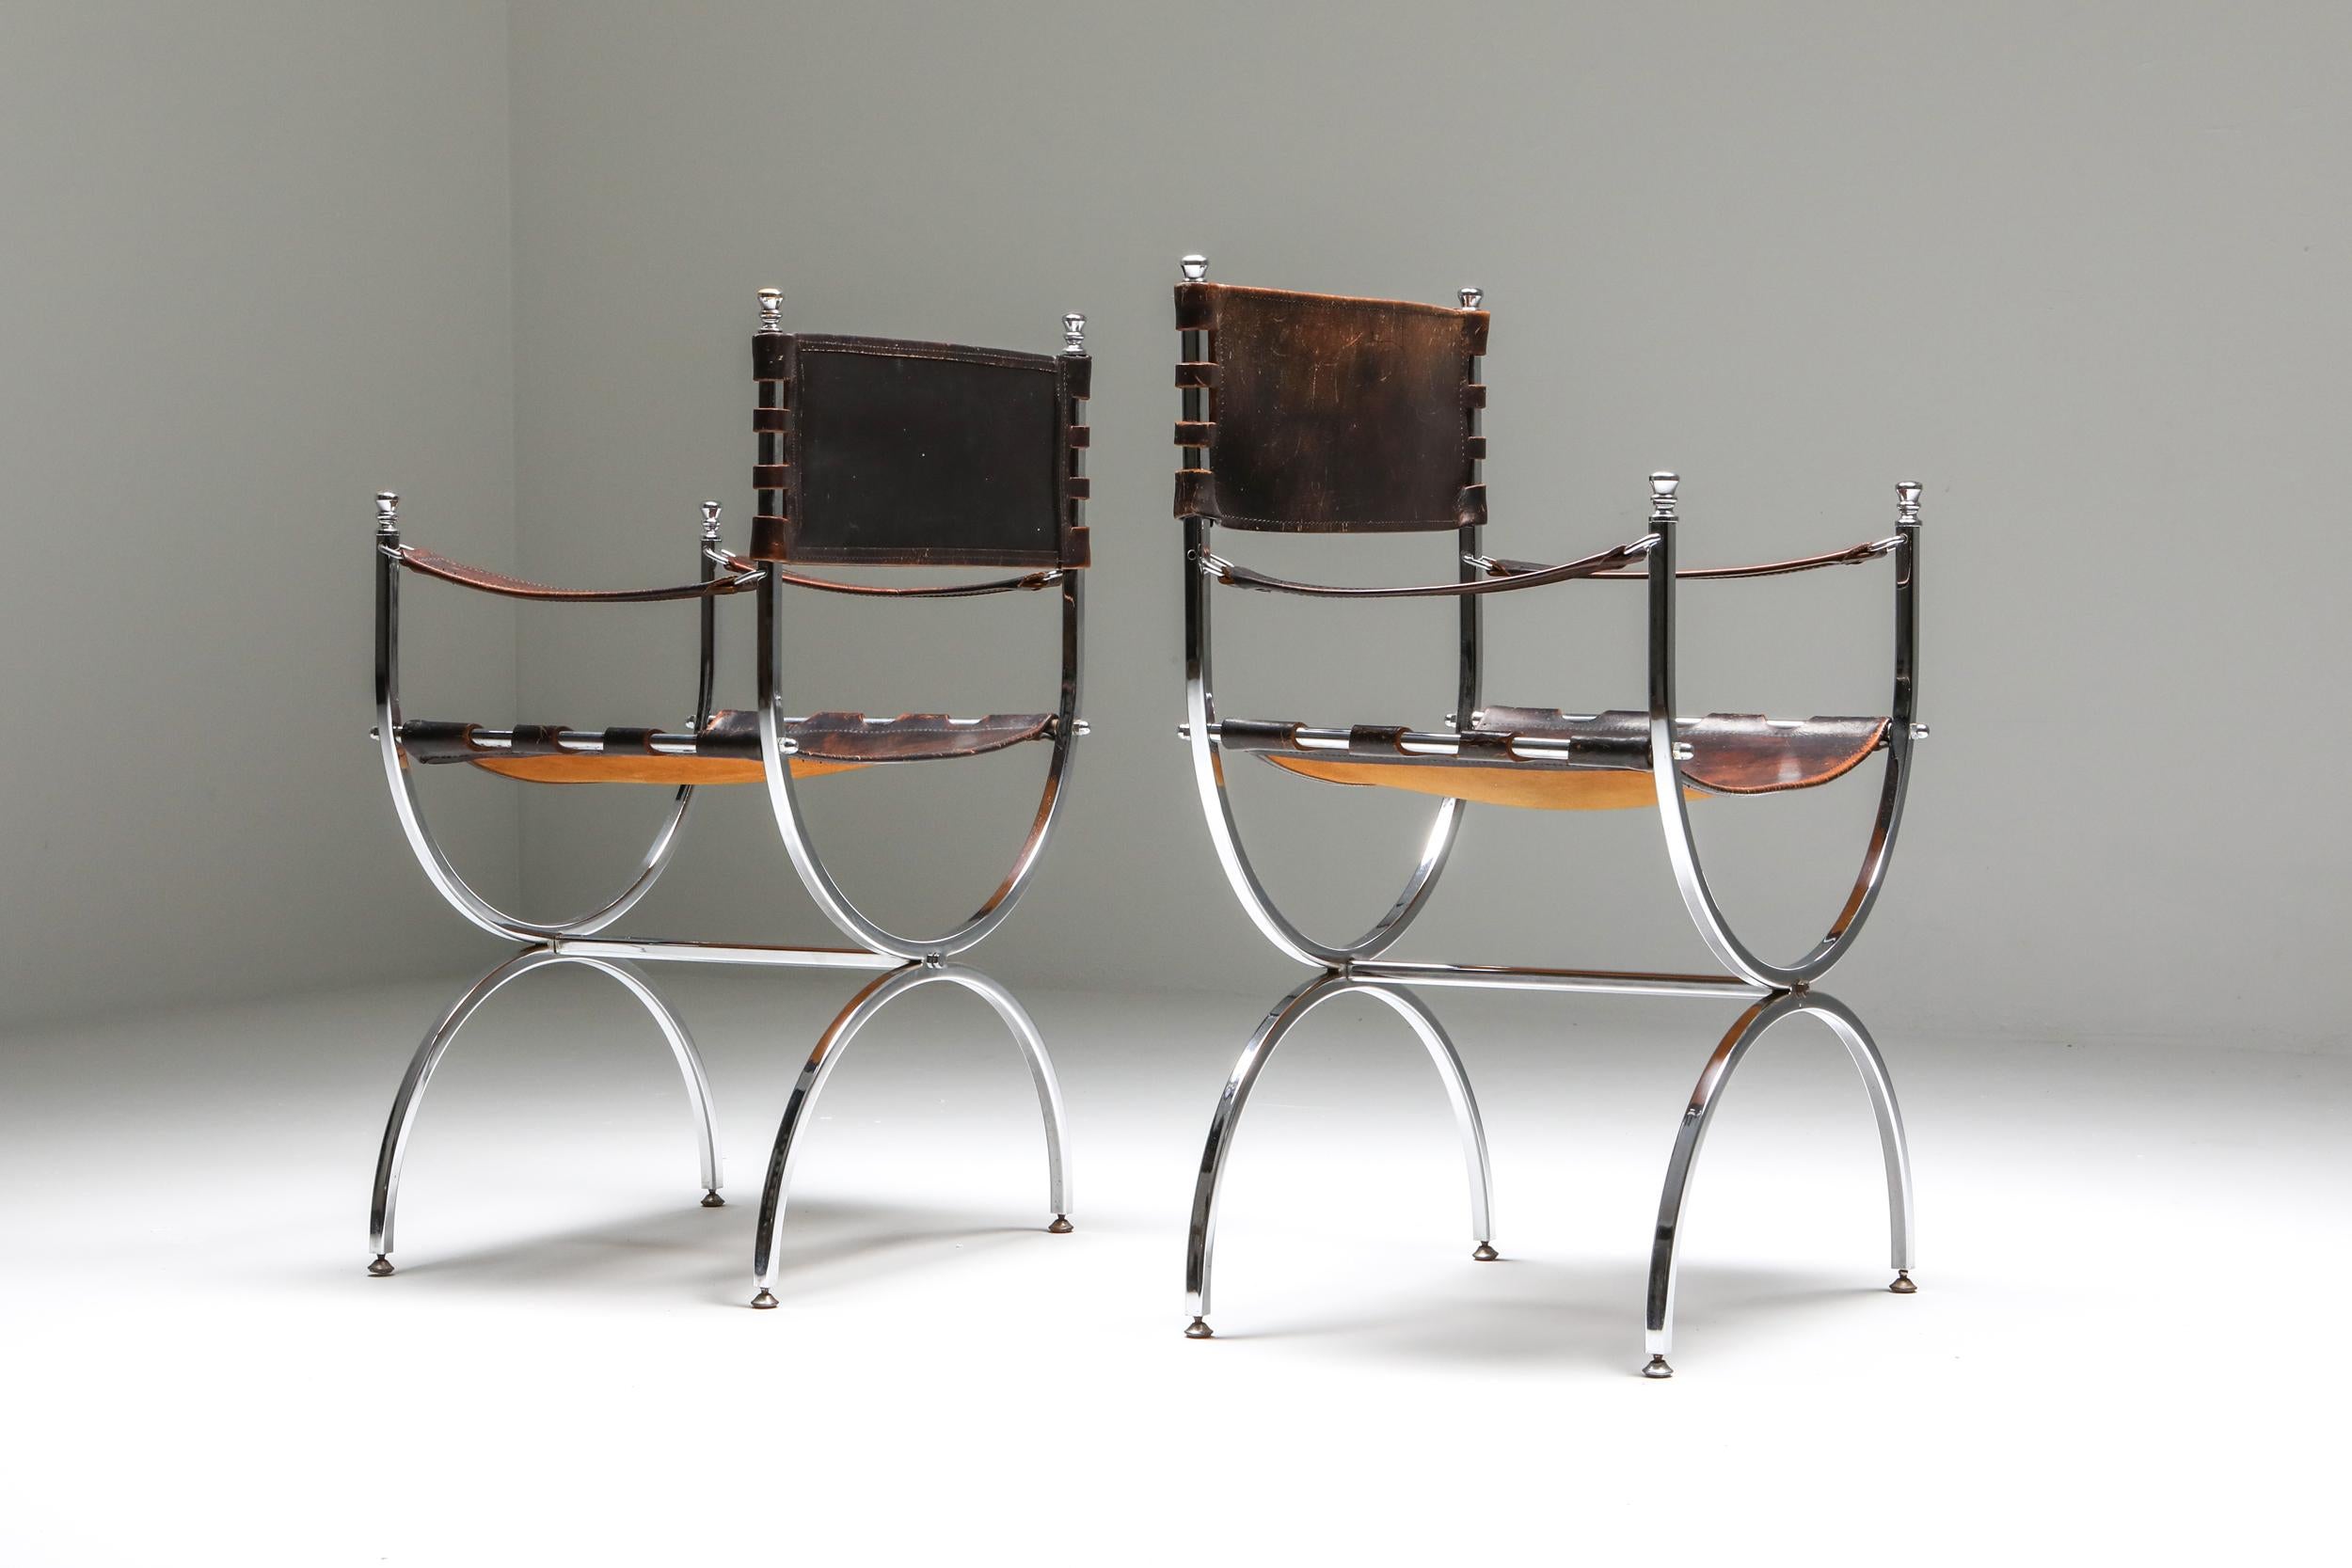 “Savonarola” Emperor pair of chairs by Maison Jansen, 1970s.

Luxury Maison Jansen armchairs with elegant chrome frames
and beautifully patinated thick brown leather, seats, back and armrests.
Produced in France during the 1970s.
The chairs are